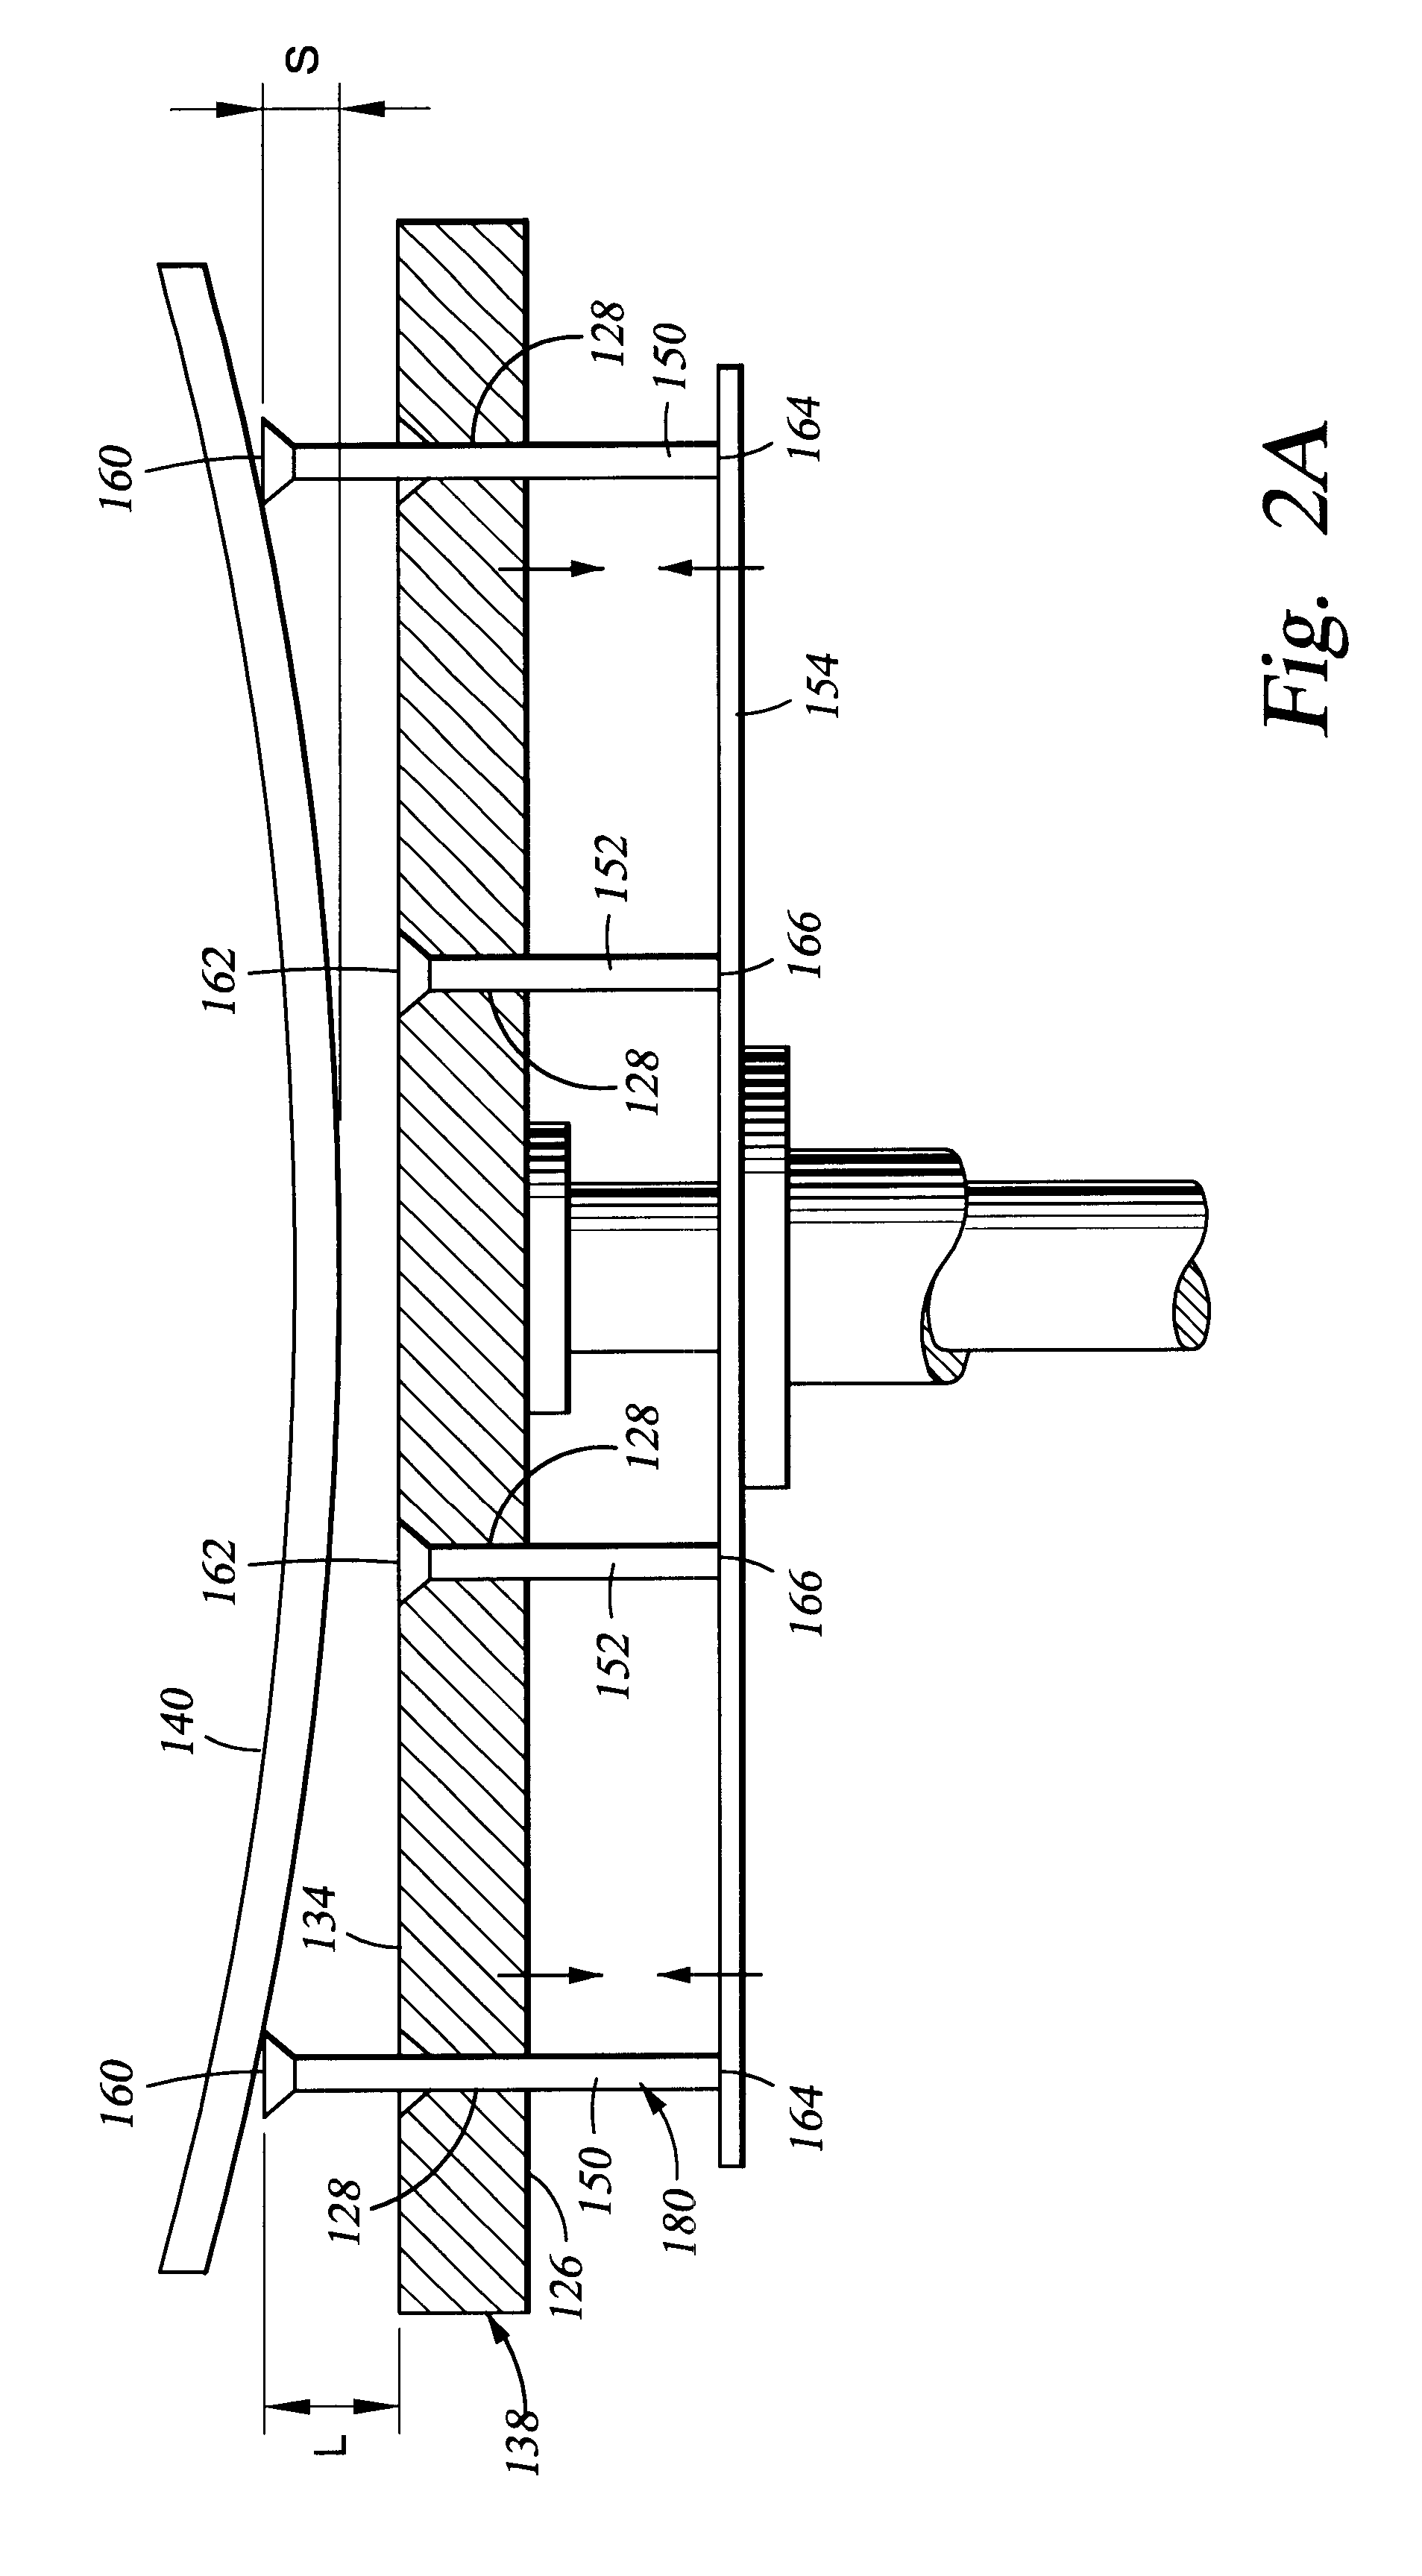 Method and apparatus for dechucking a substrate